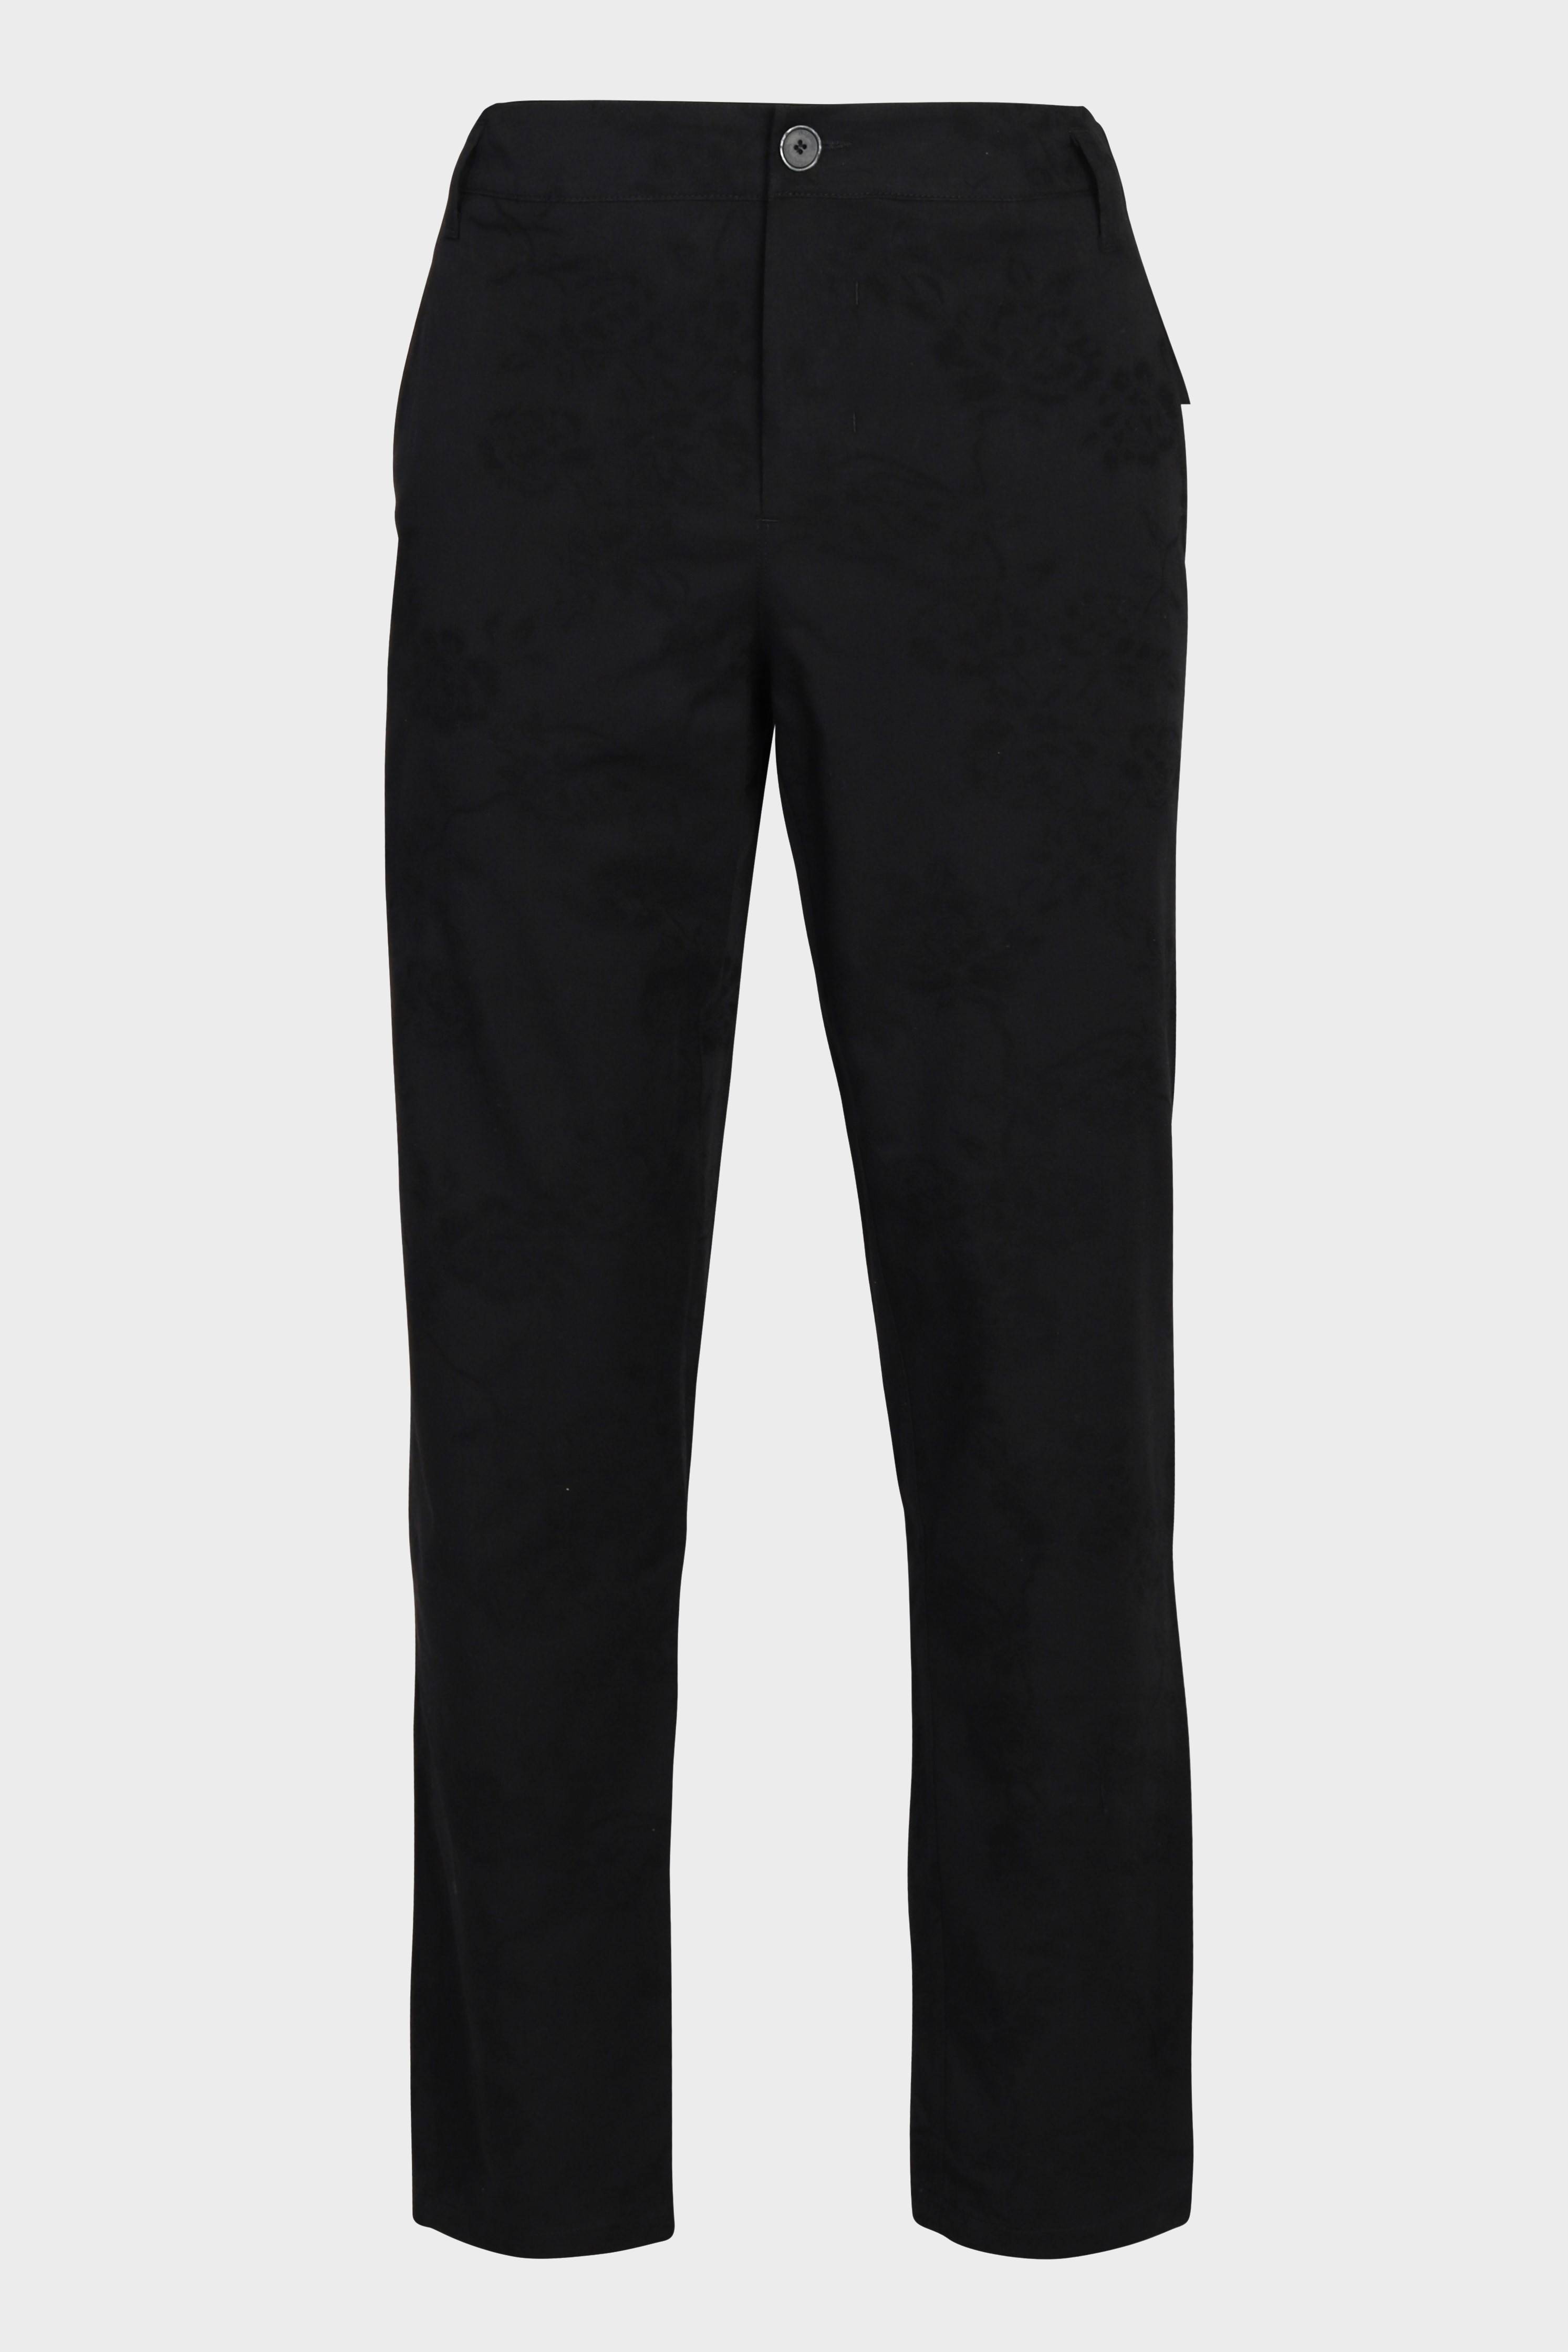 HANNIBAL. Embroidered Trouser Hannes in Black